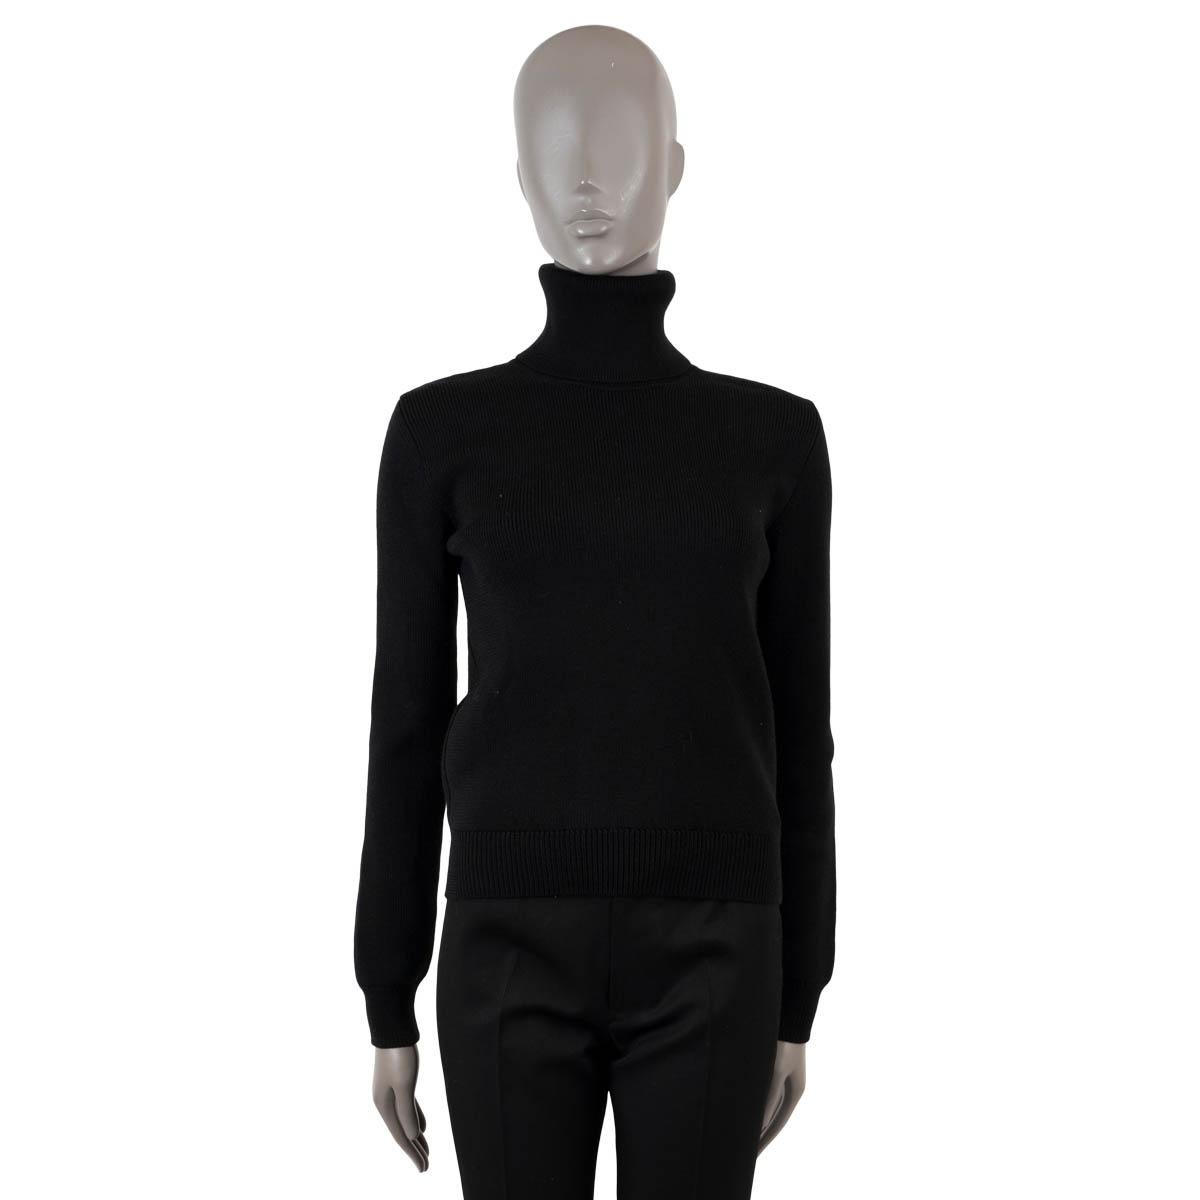 SAINT LAURENT black wool RIB-KNIT TURTLENECK Sweater M In Excellent Condition For Sale In Zürich, CH